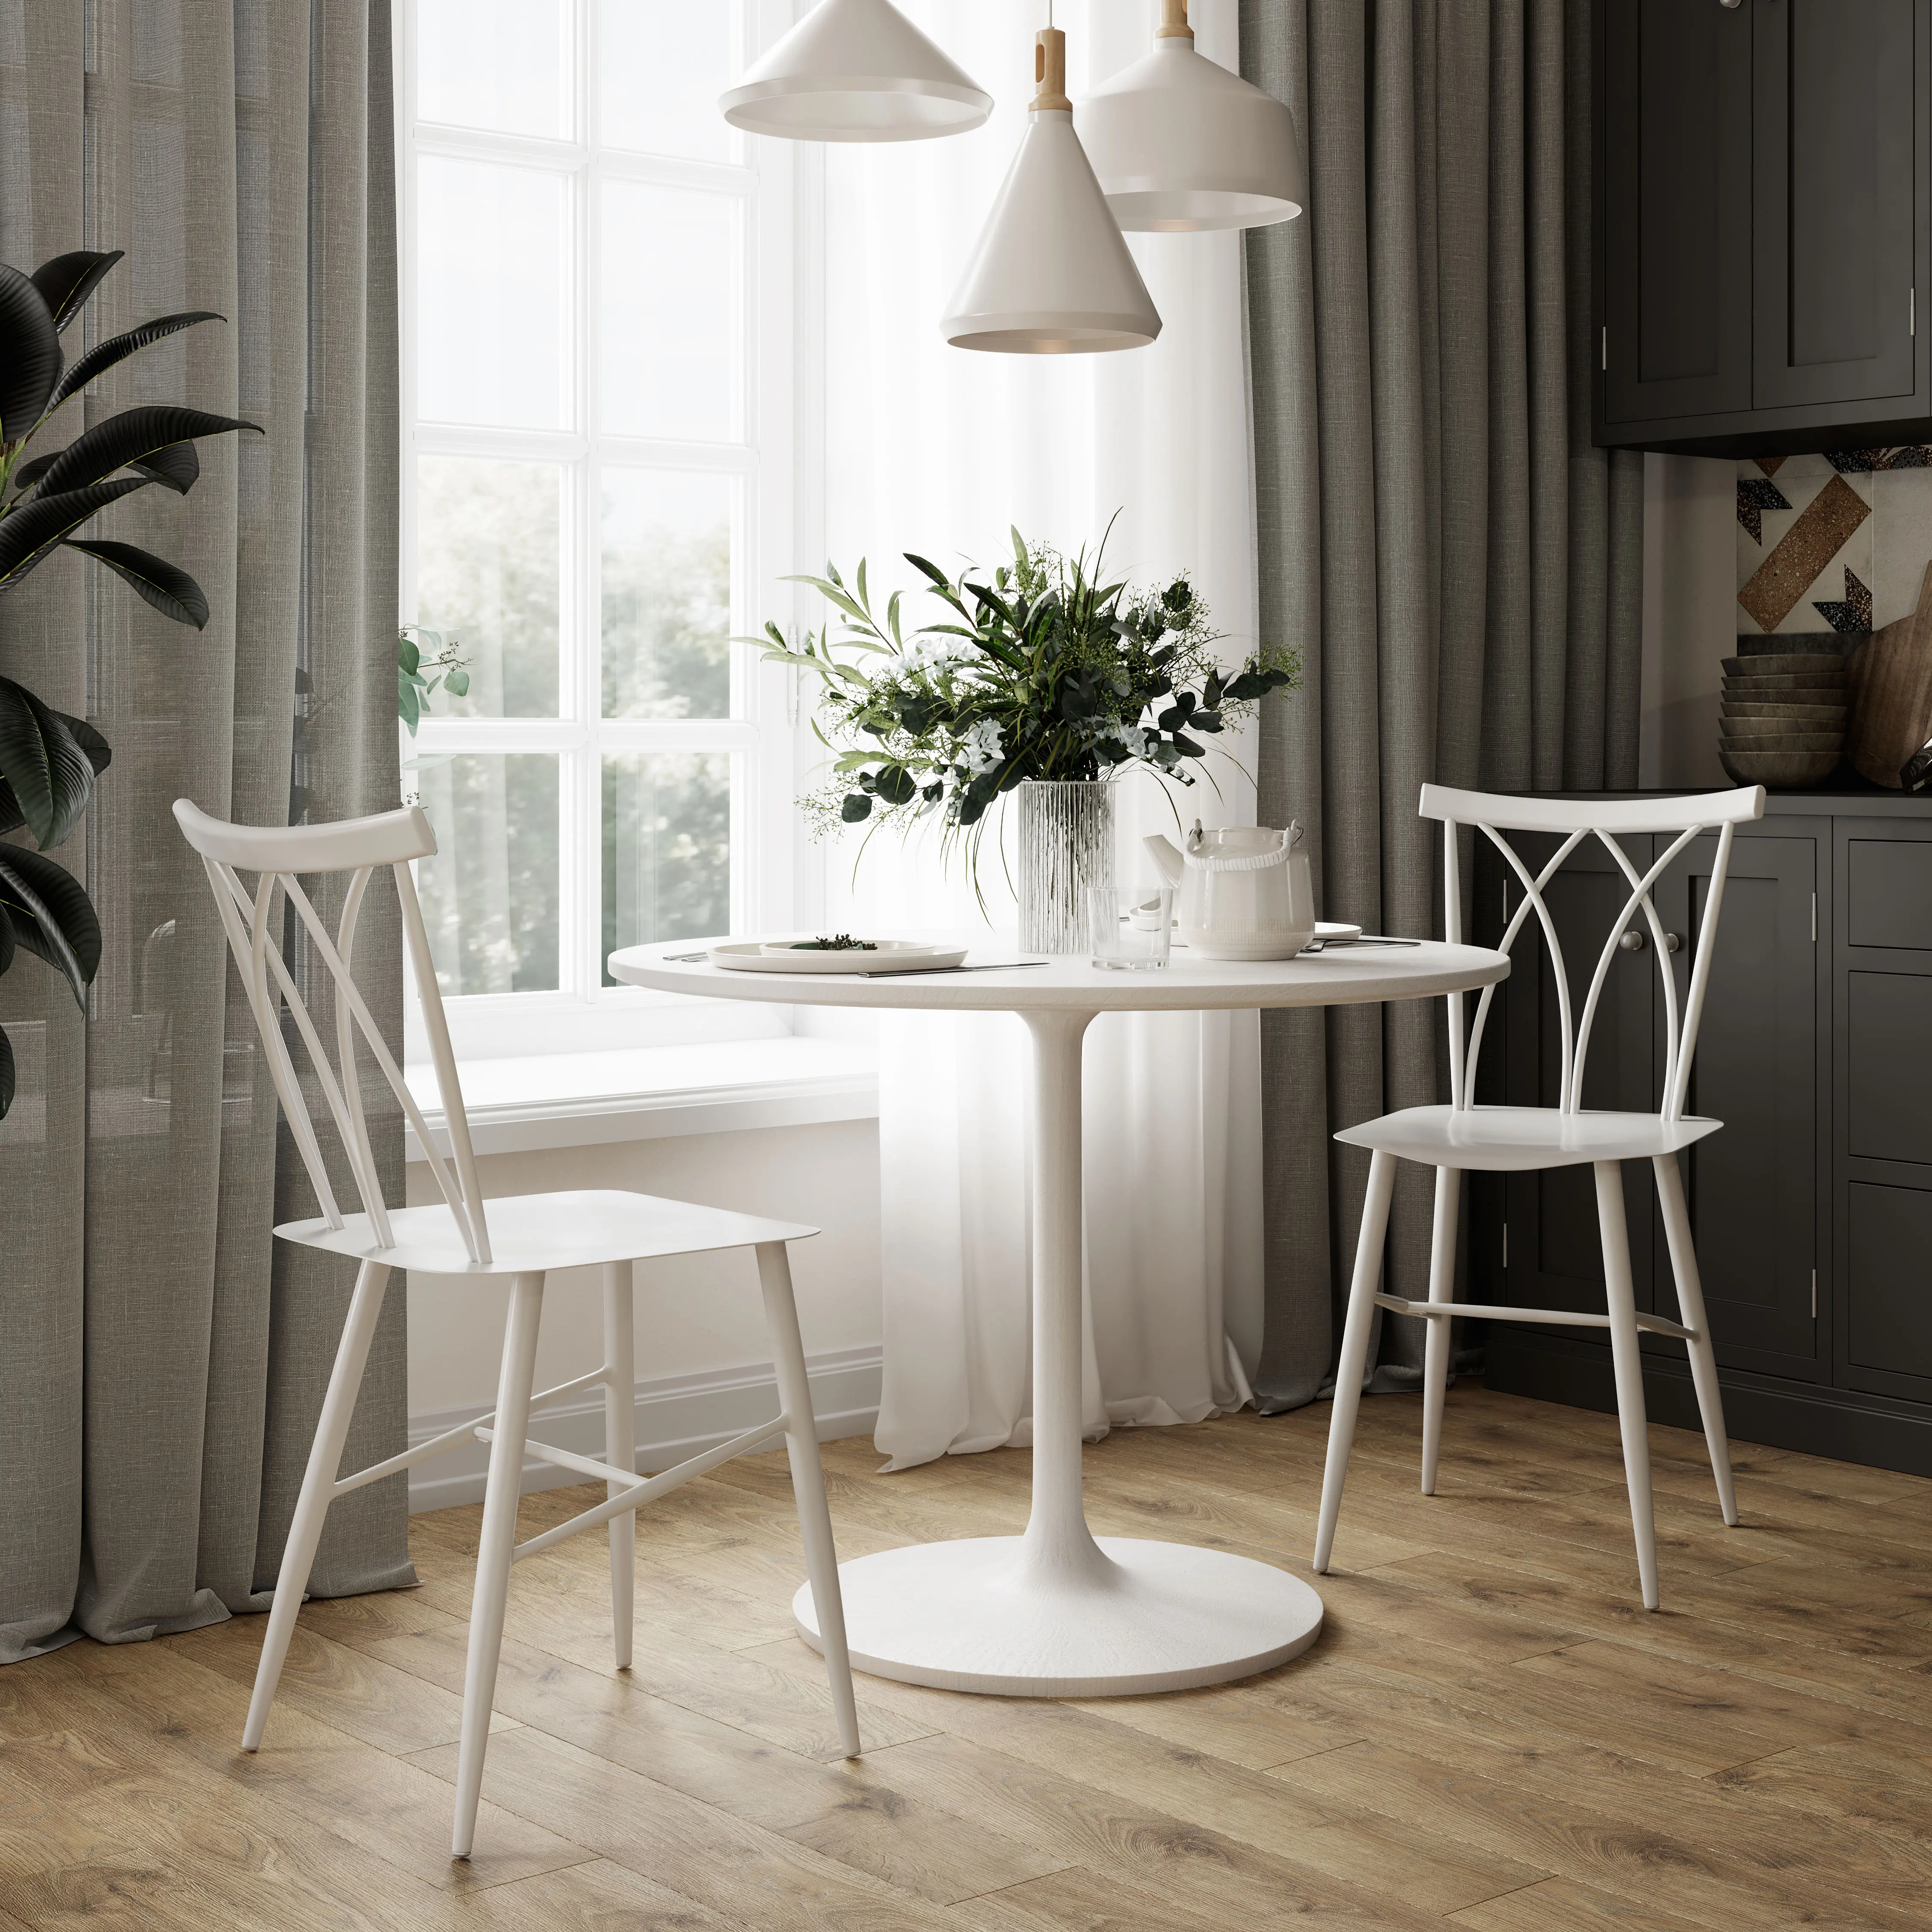 LSAVLS1WH Easton White Metal Dining Room Chair (Set of 2) sku LSAVLS1WH